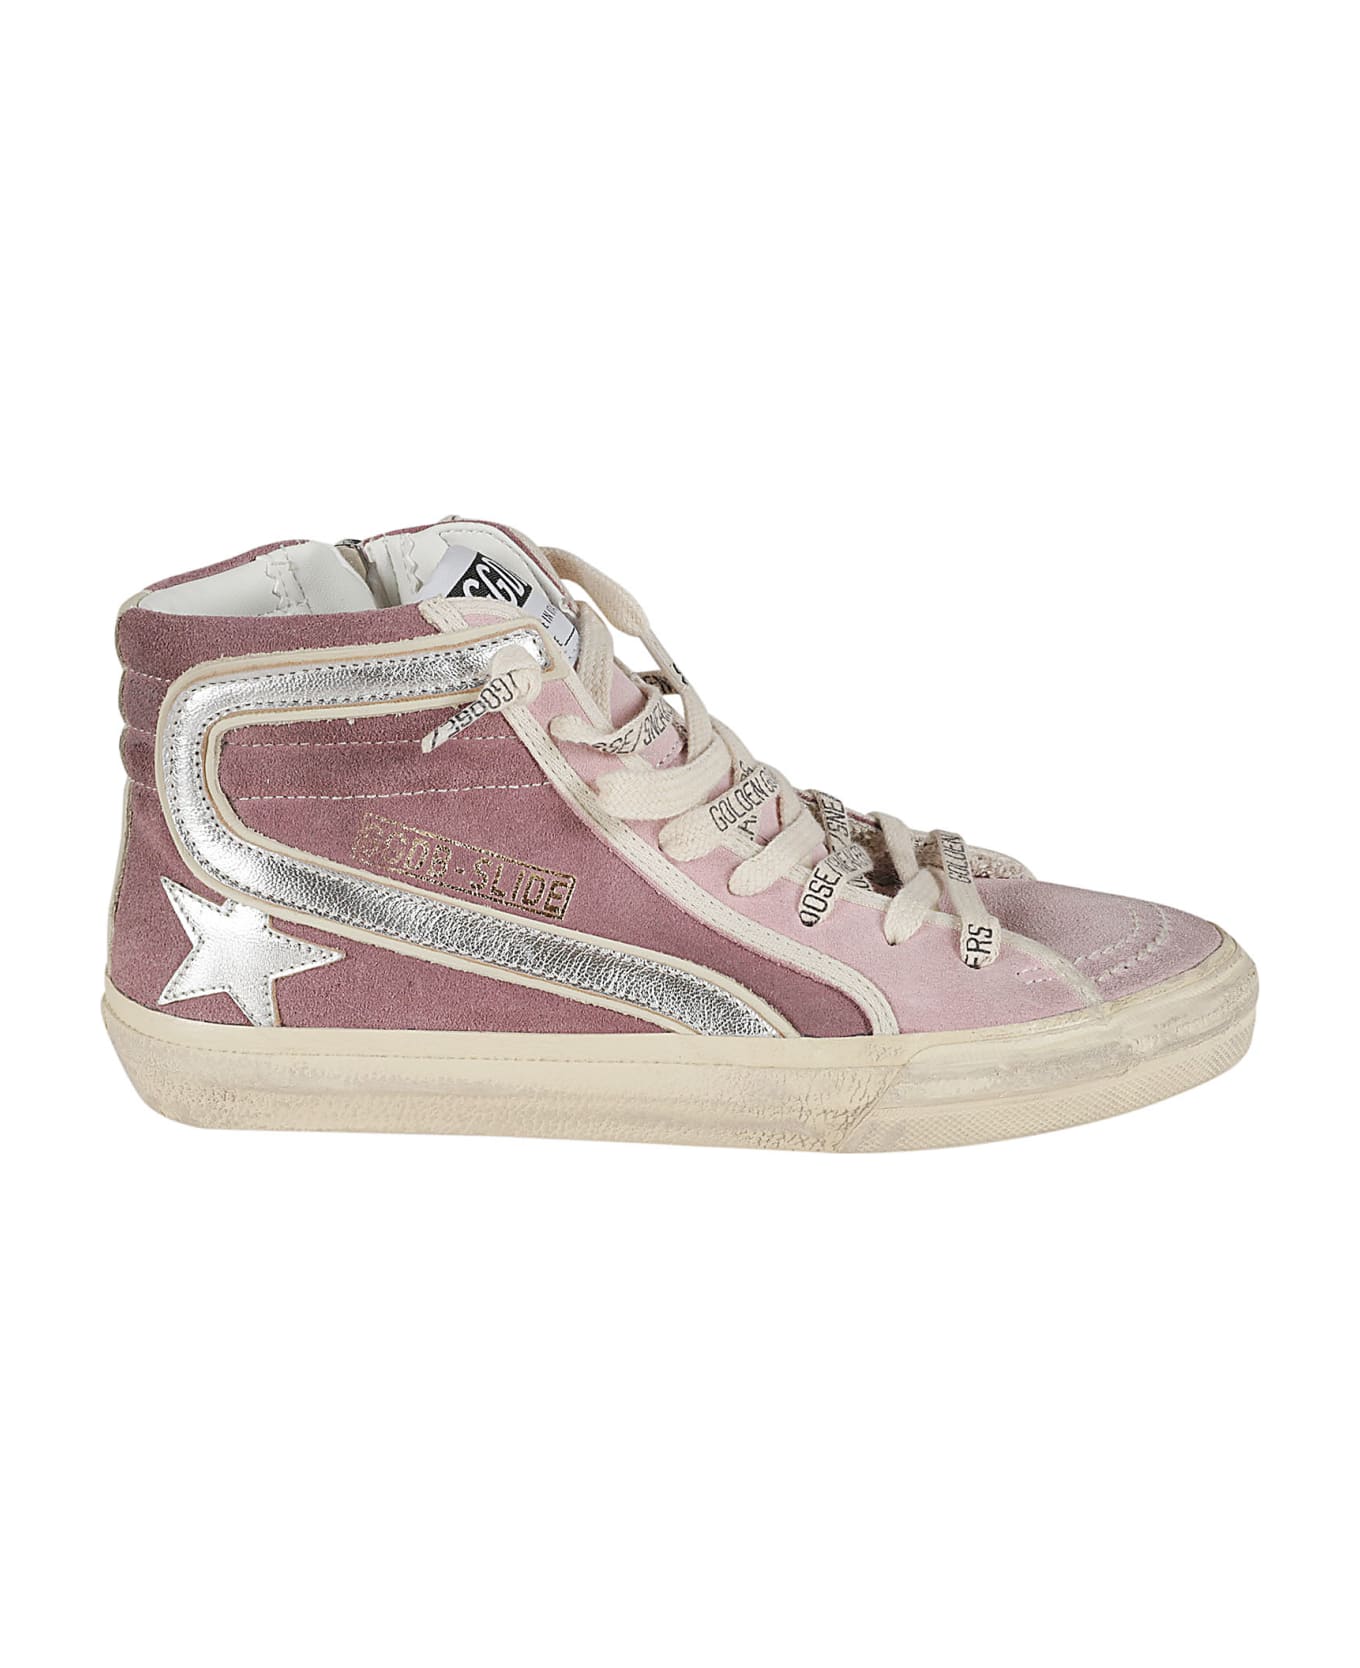 Golden Goose Slide Classic Sneakers - Purple/Silver/Ivory